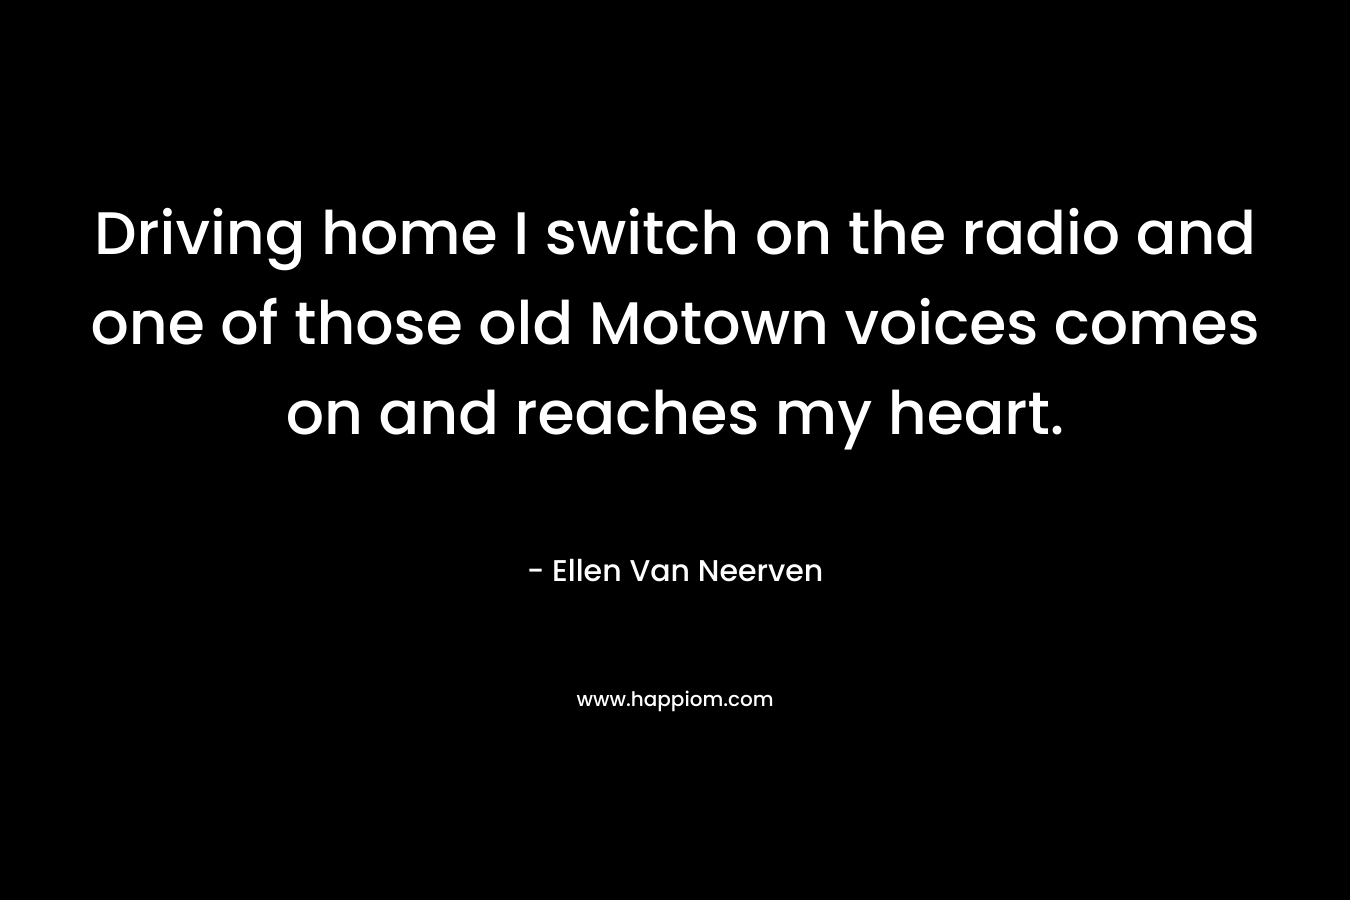 Driving home I switch on the radio and one of those old Motown voices comes on and reaches my heart. – Ellen Van Neerven